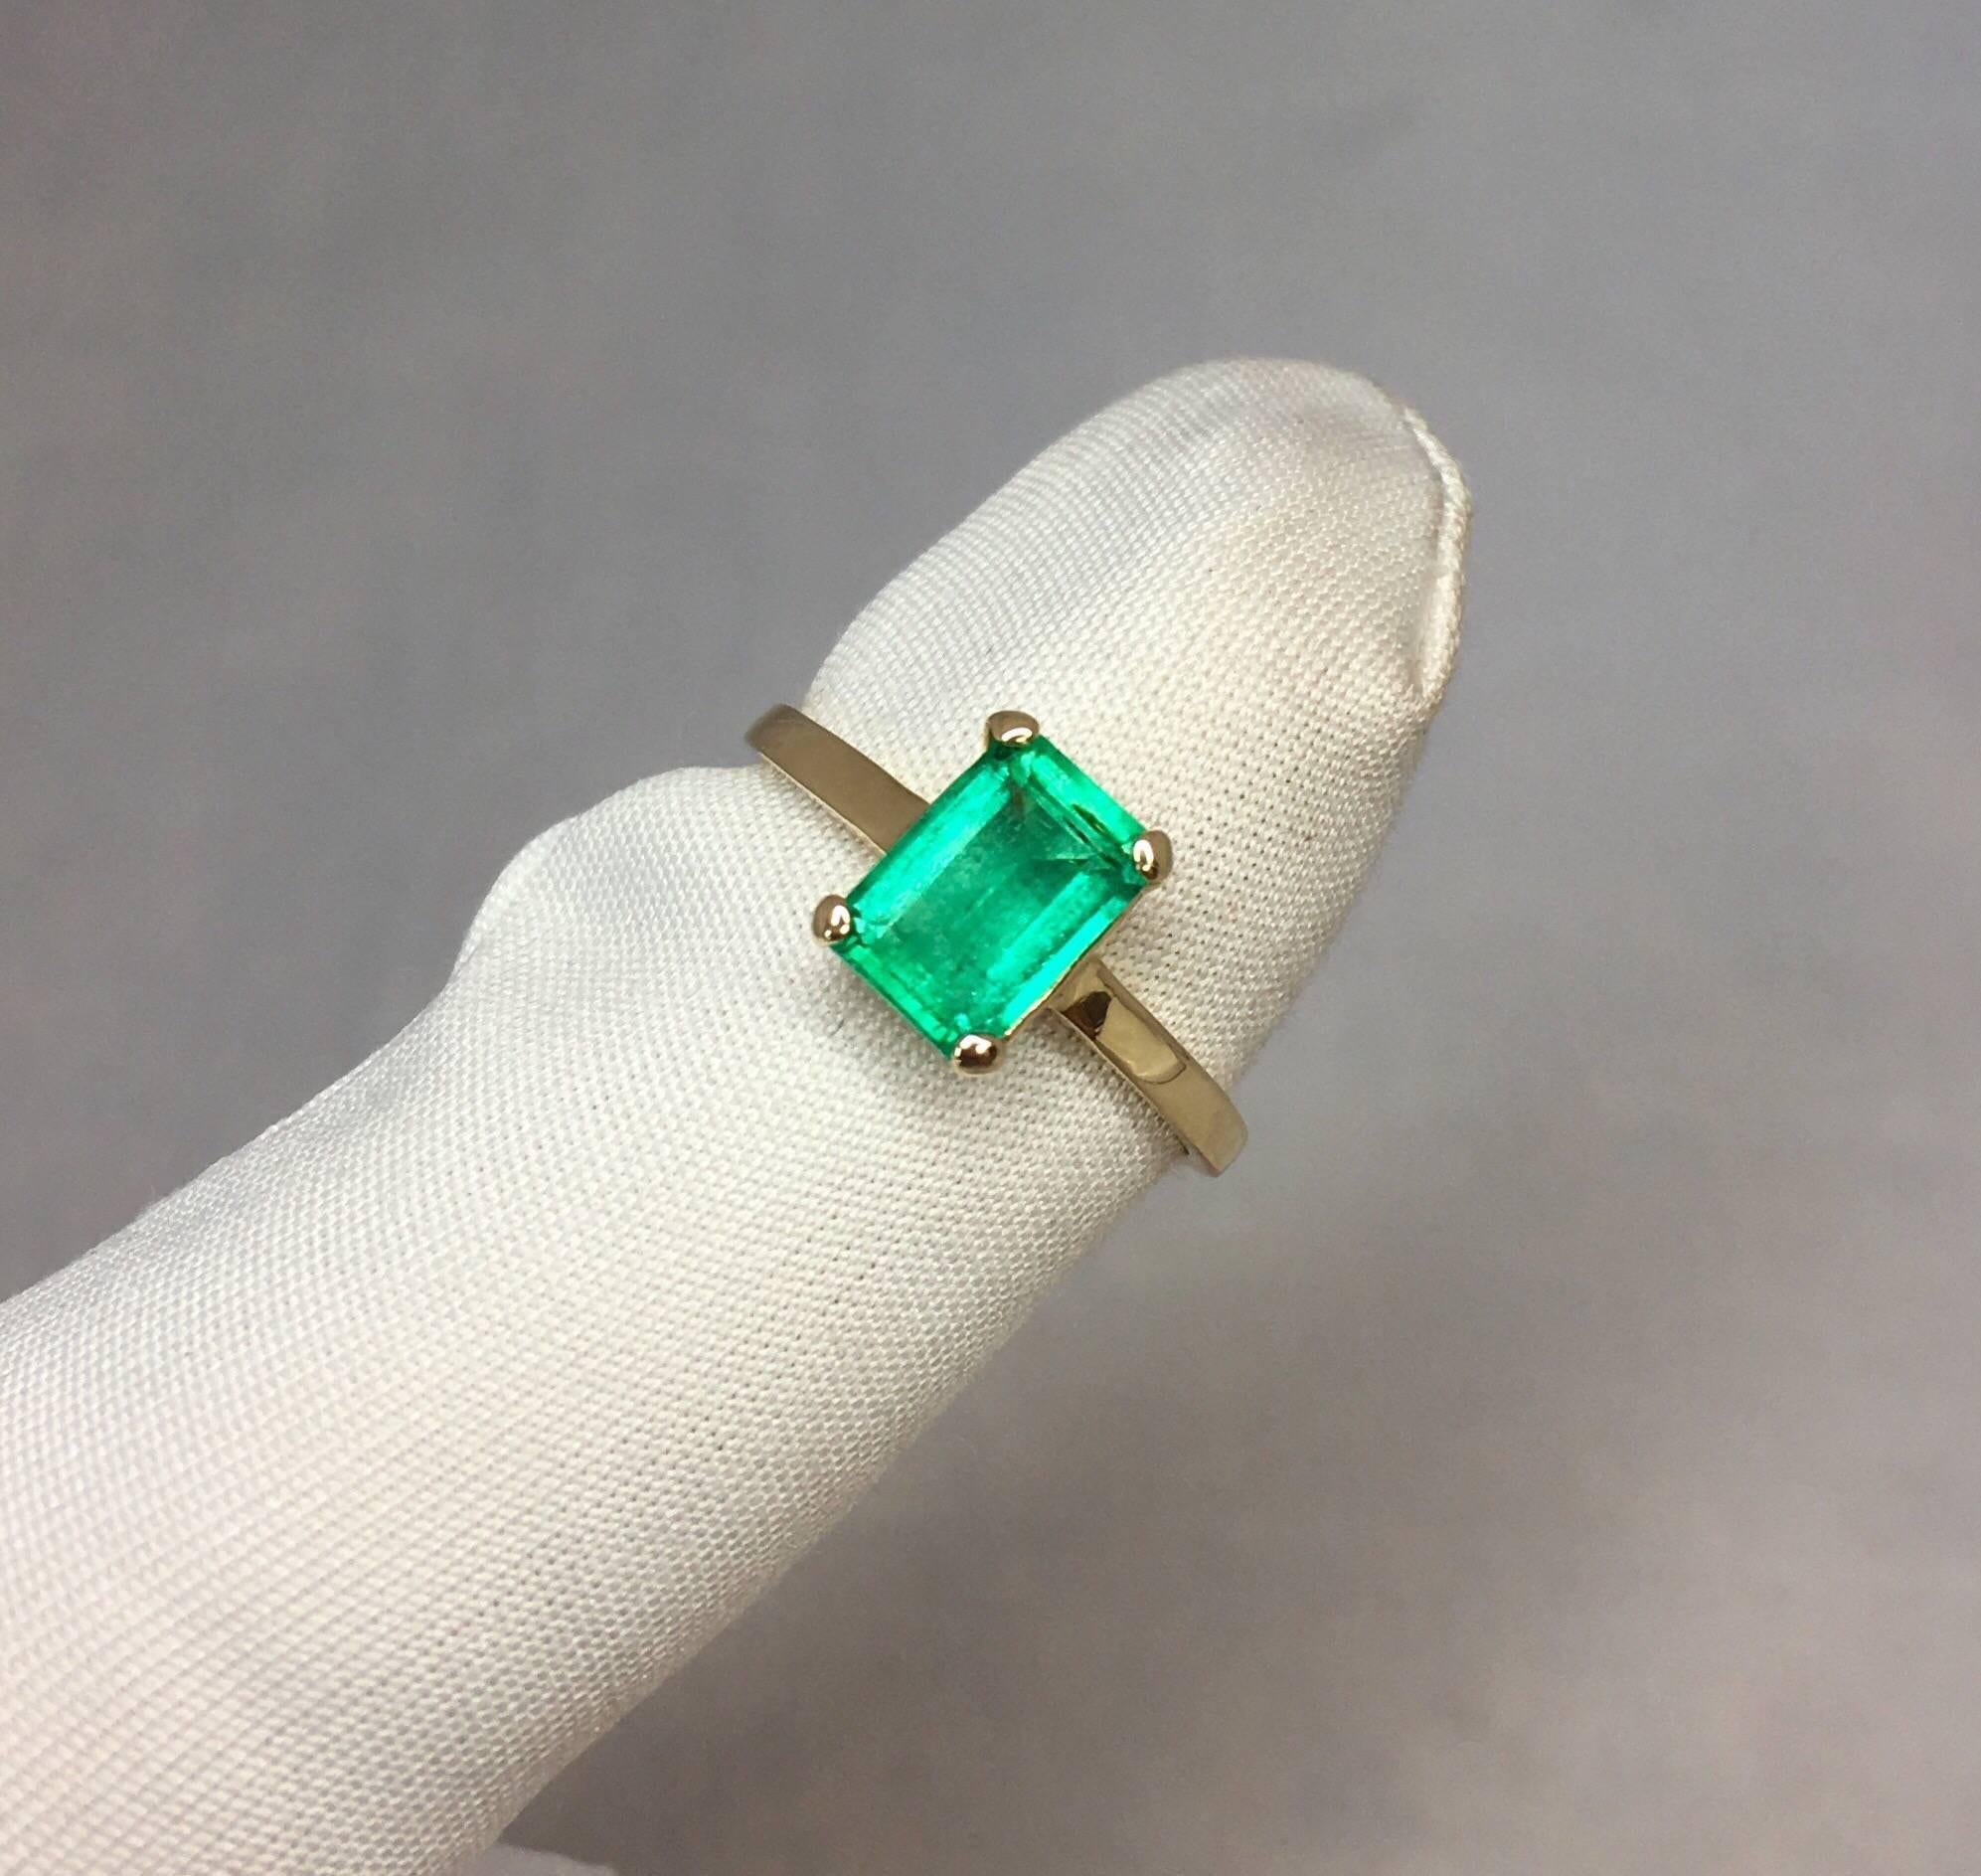 IGI Certified 1.17 Carat Vivid Green Colombian Emerald Solitaire Gold Ring 4